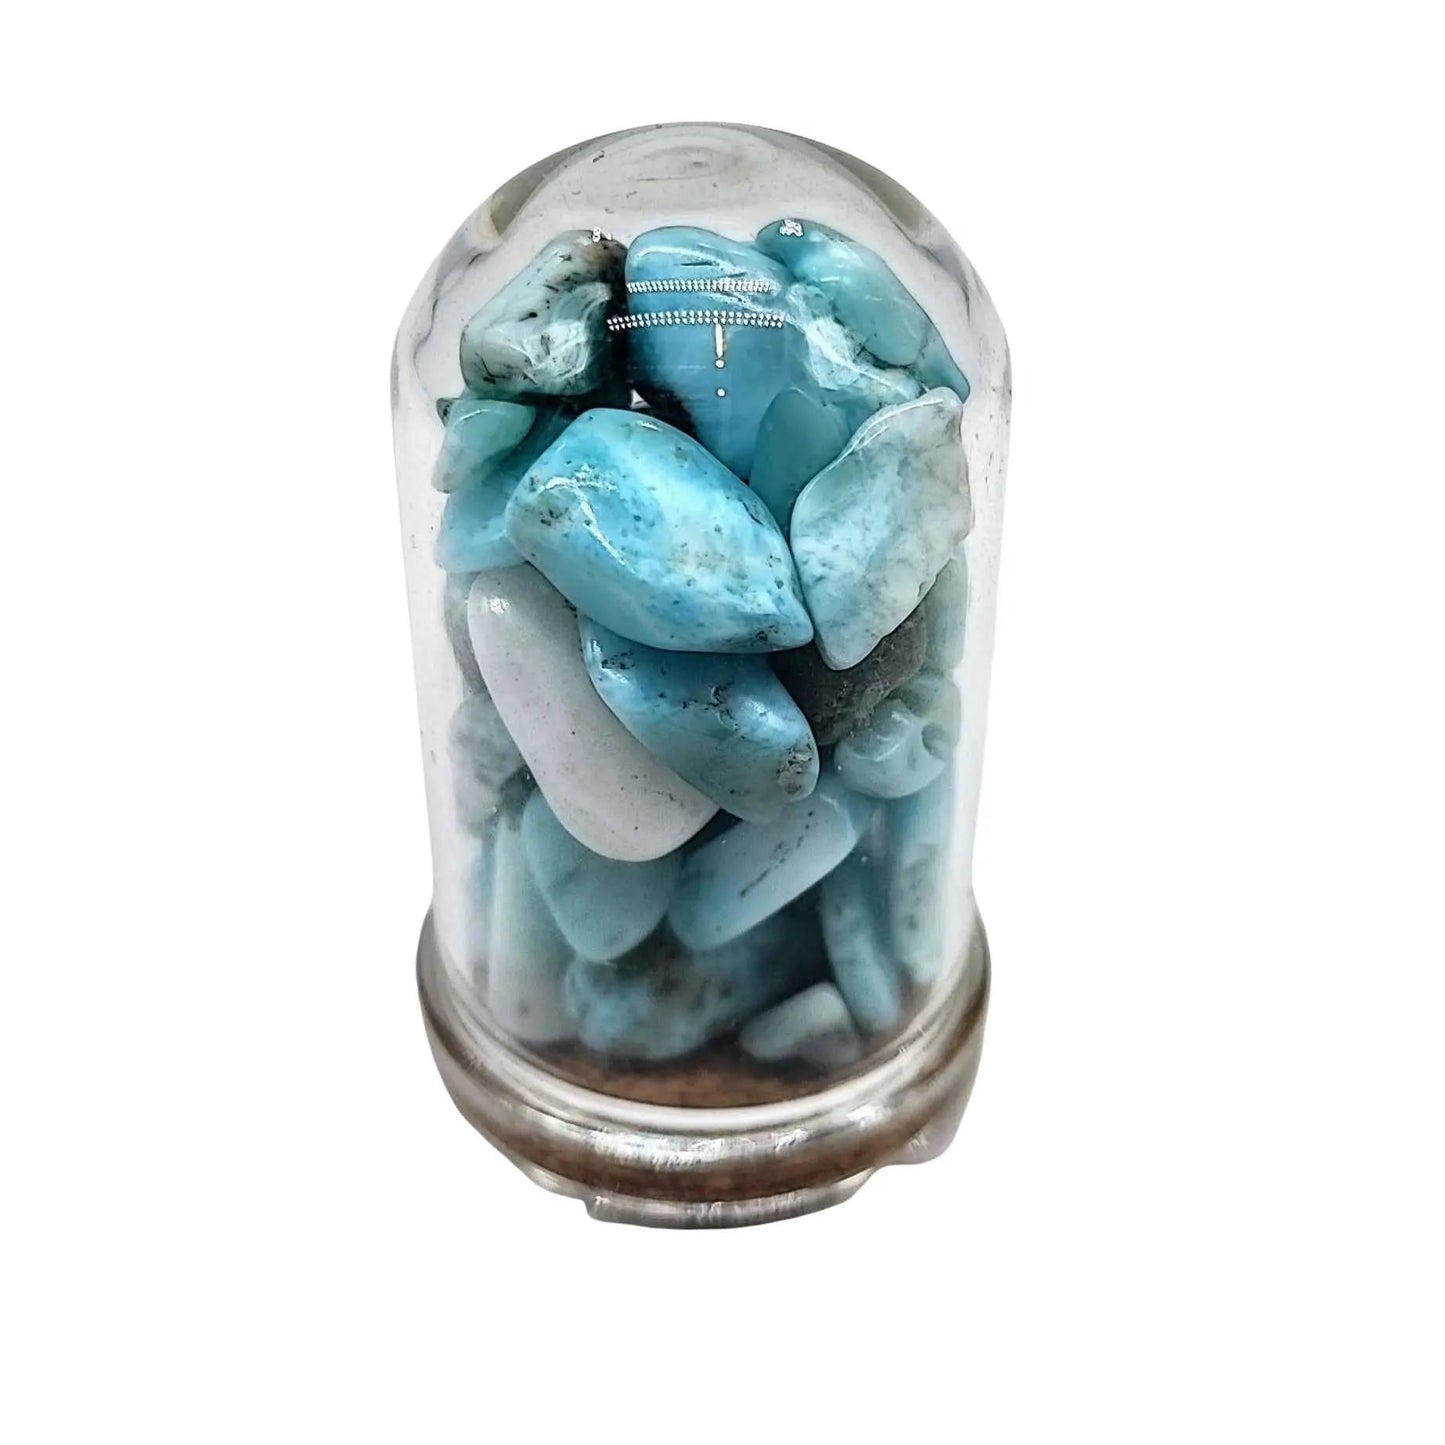 Home Decor -Small Decorative Bell -Turquoise -15ml -Crystal Specimen -Aromes Evasions 